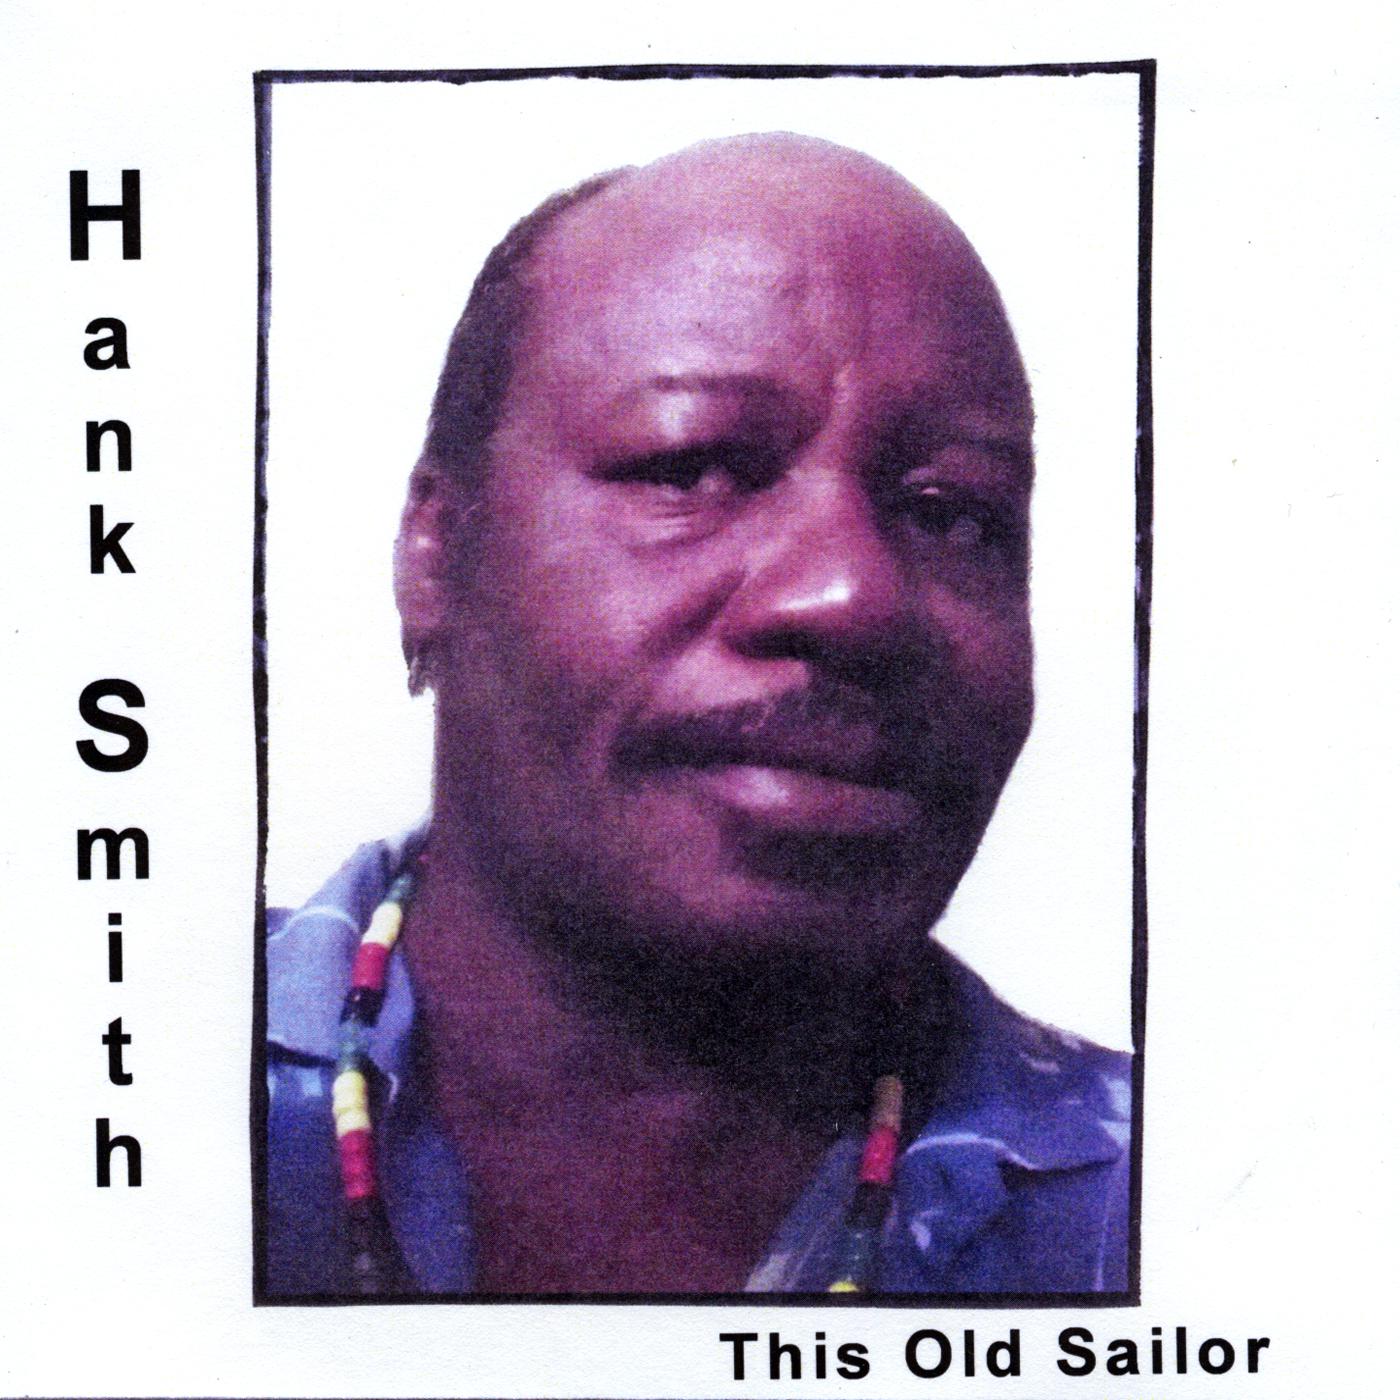 This Old Sailor